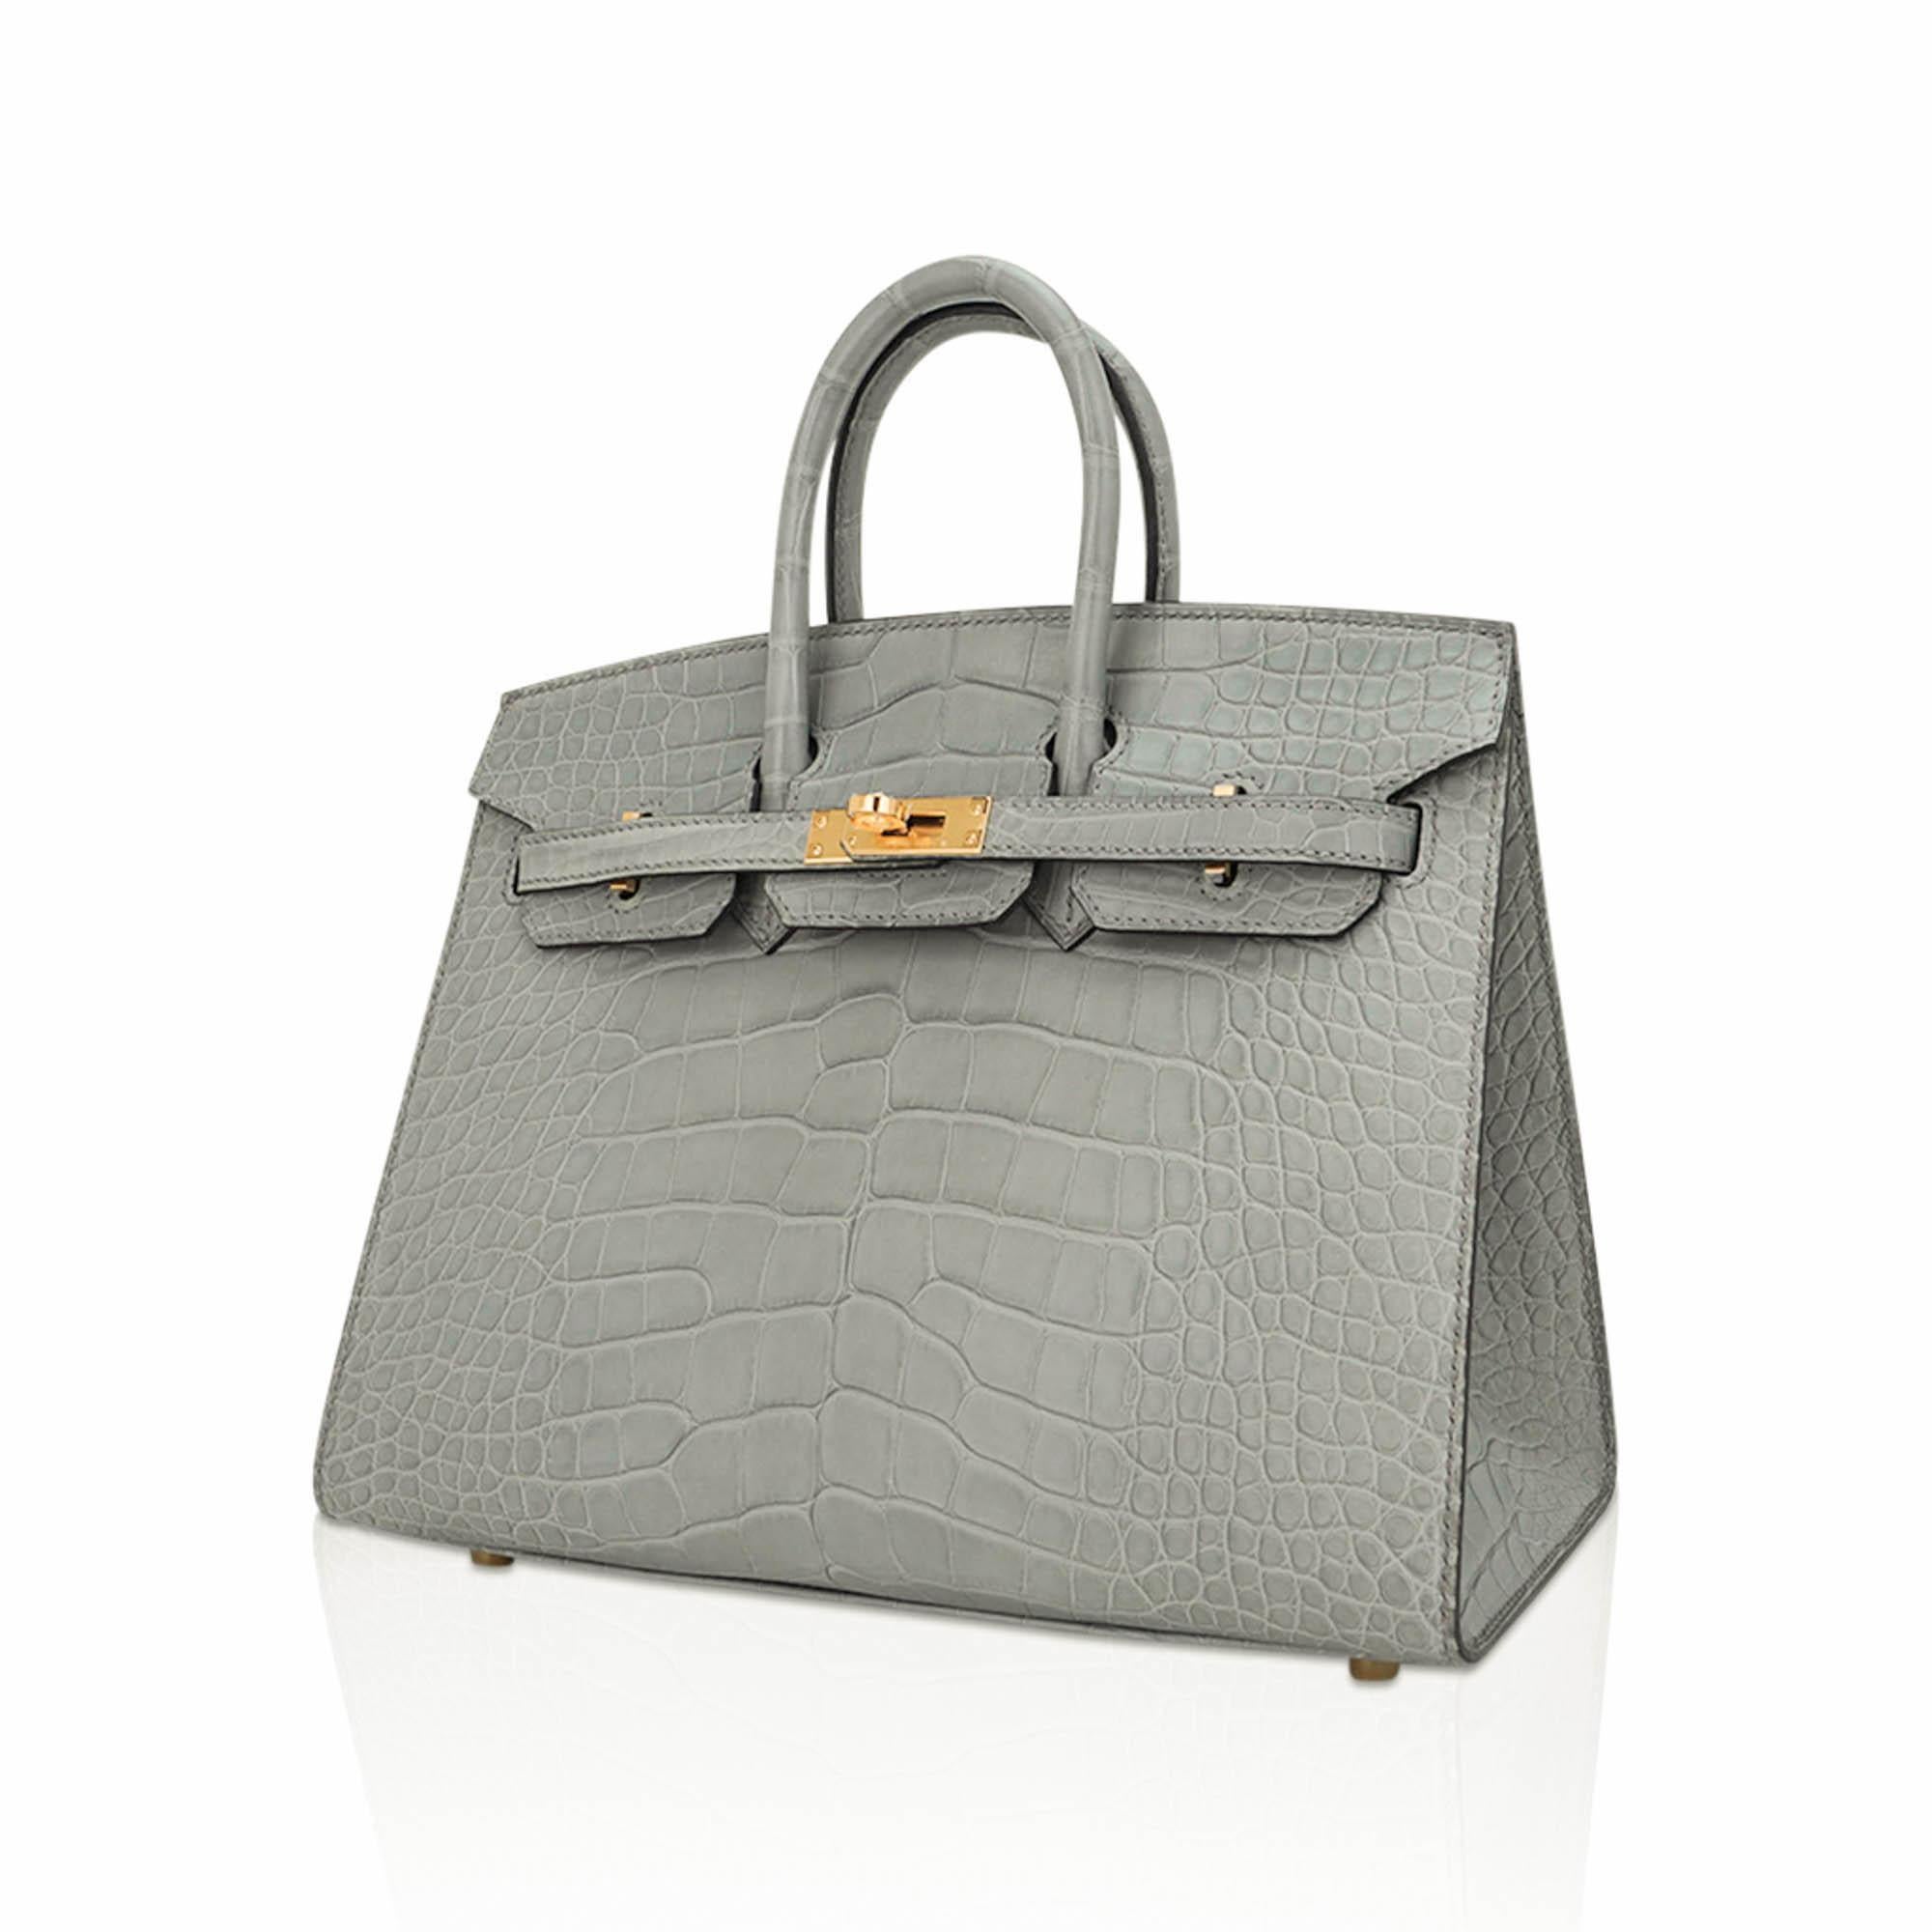 Hermes Birkin 25 Gris Ciment Matte Exotic Skin Bag Gold Hardware In New Condition For Sale In Miami, FL